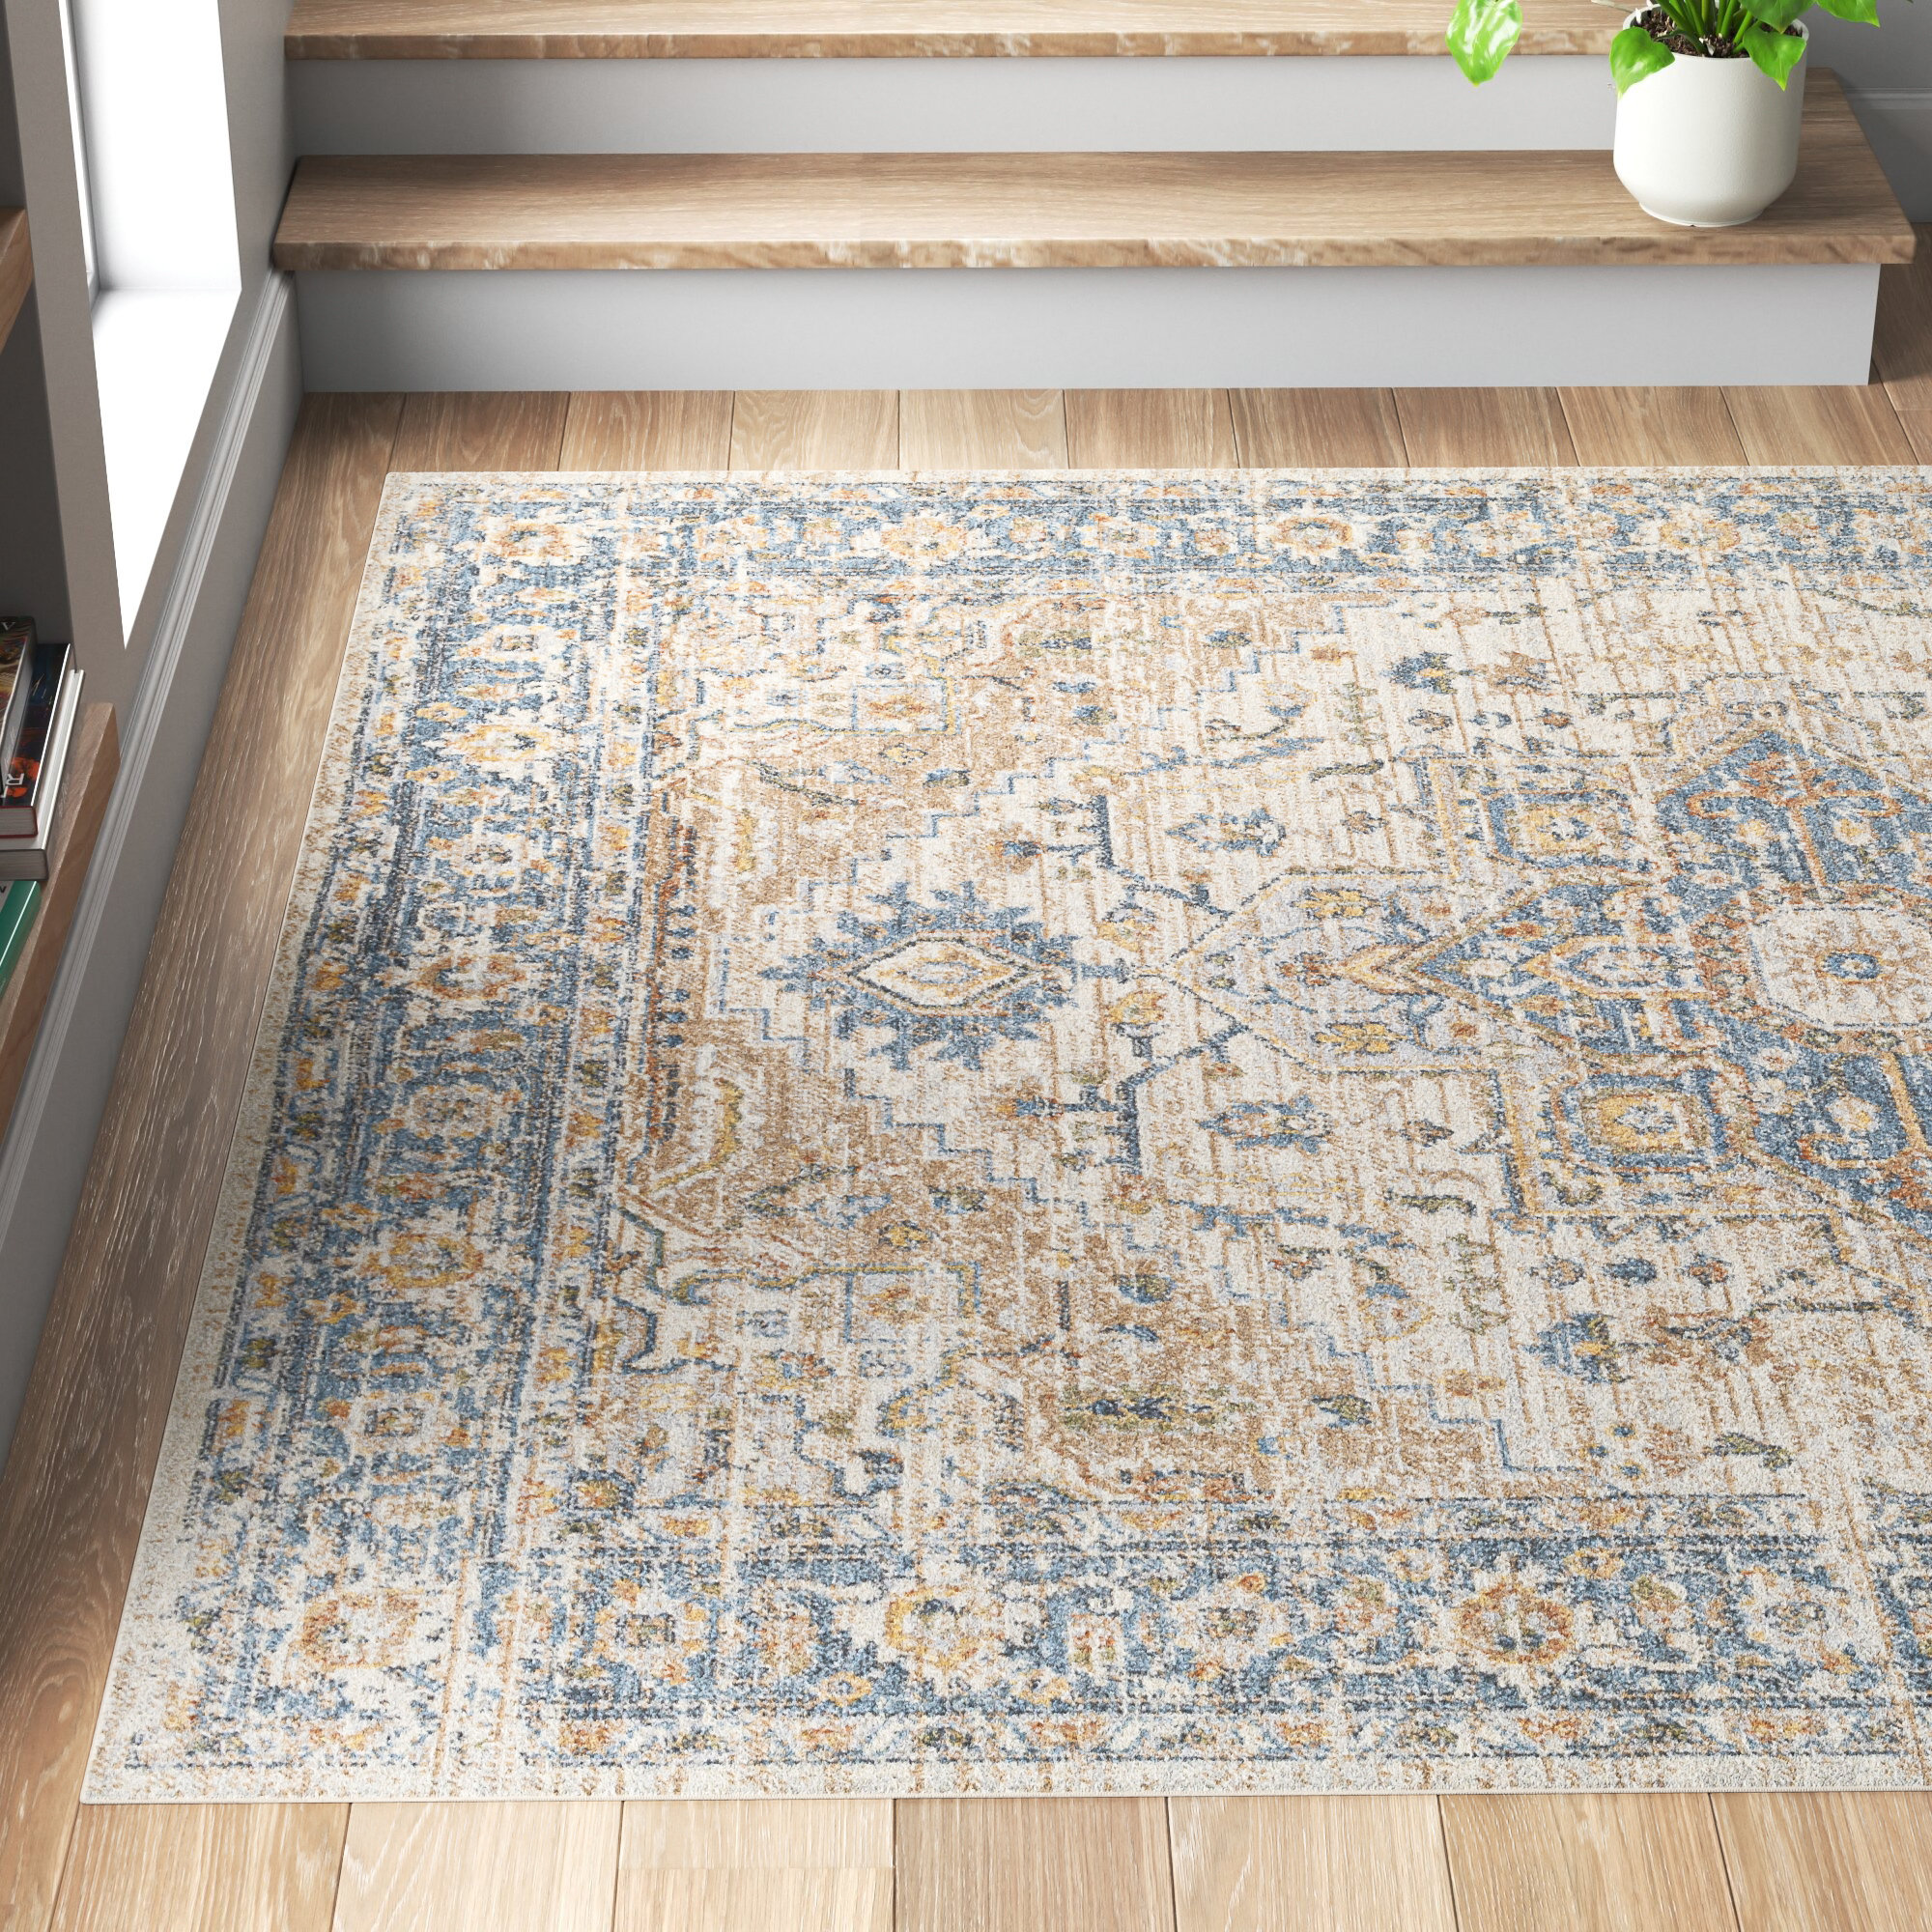 Boho Area Rug 2x3, Persian Washable Small Entryway Rug, Soft Oriental Distressed Throw Rugs For Entrance Kitchen Bedroom, Non-slip Non-Shedding Low-pi